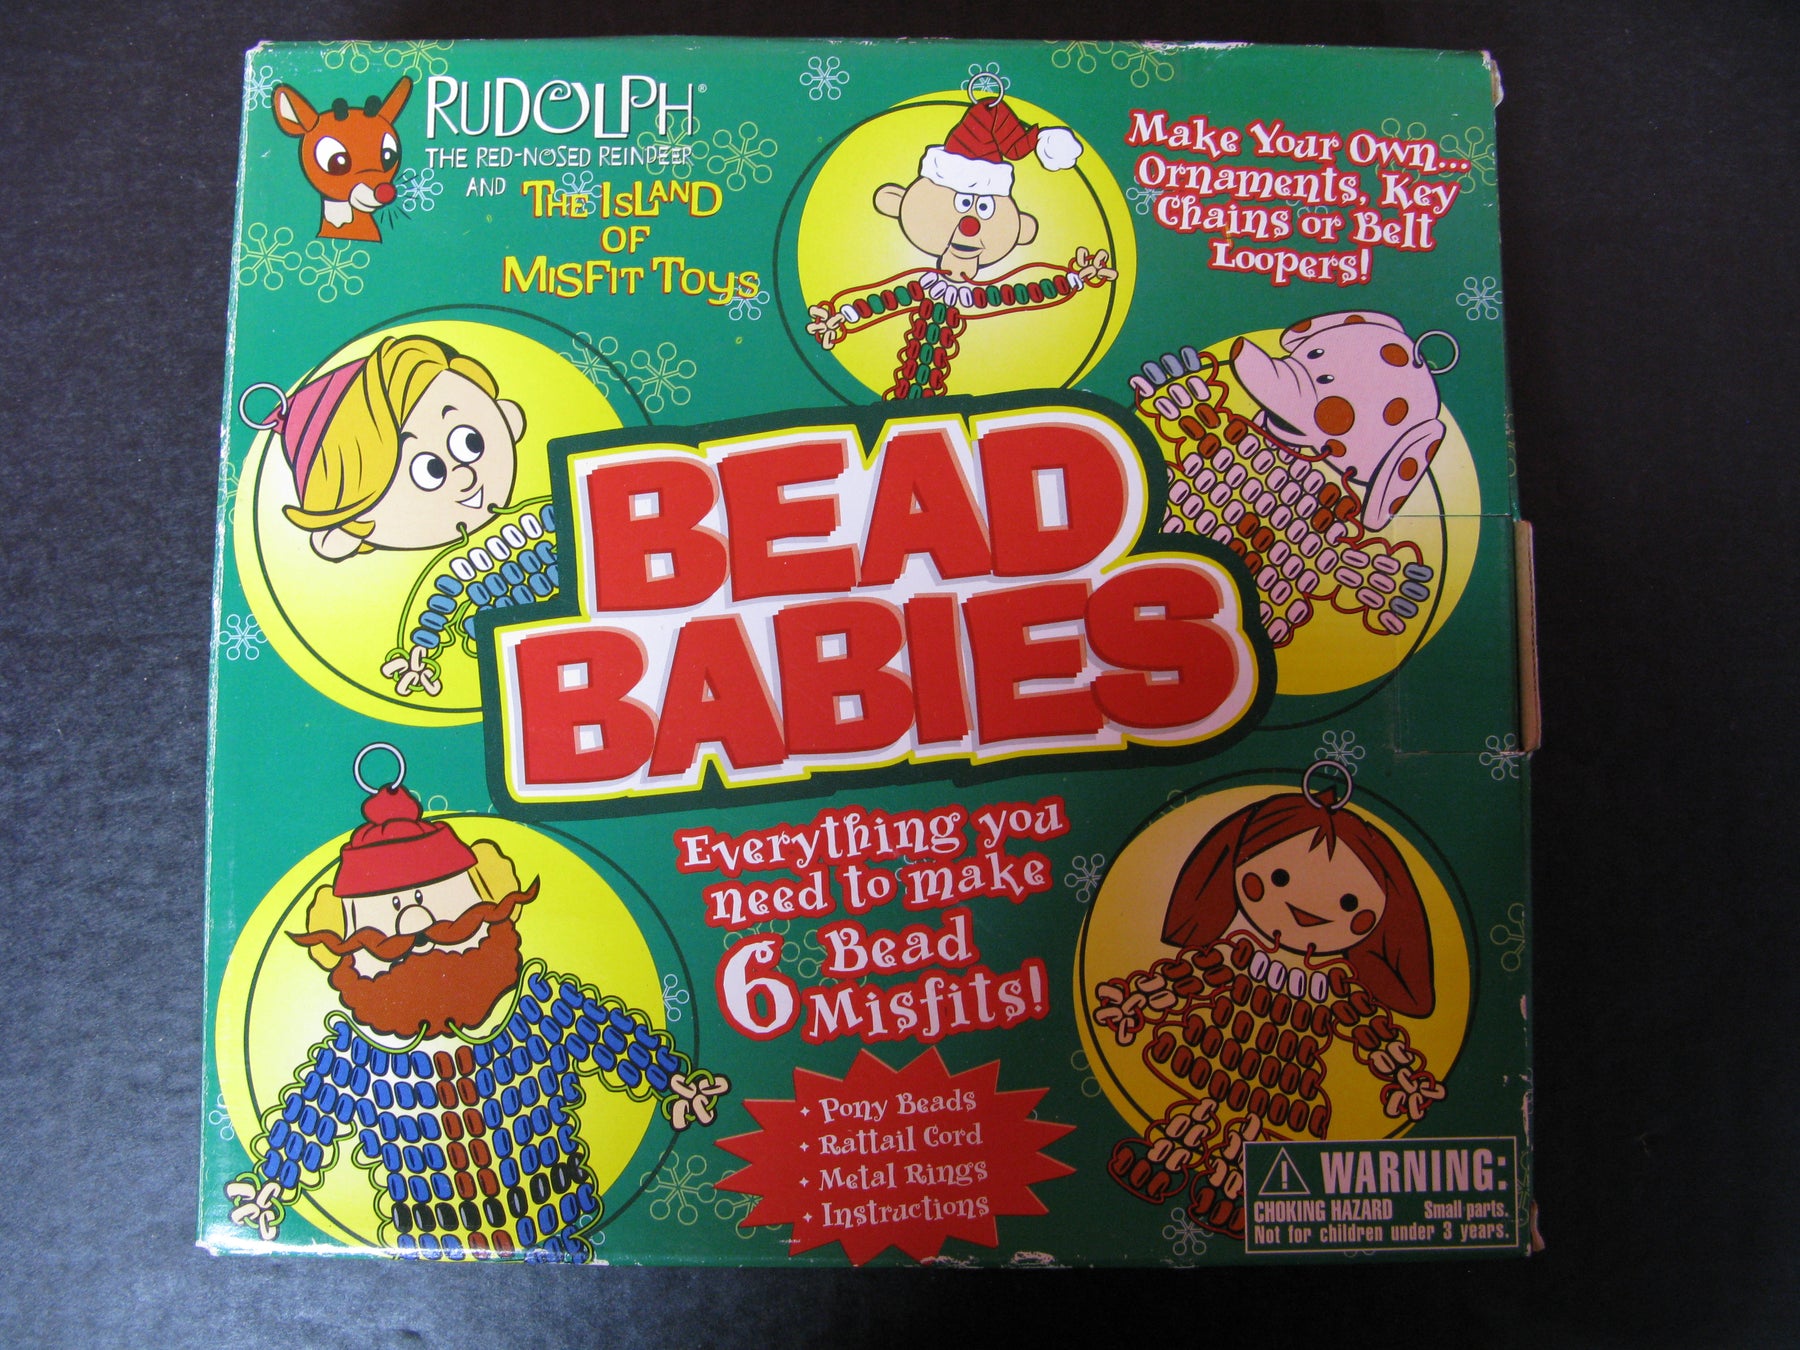 Bead Babies-Rudolph the Red Nosed Reindeer and the Island of Misfit Toys